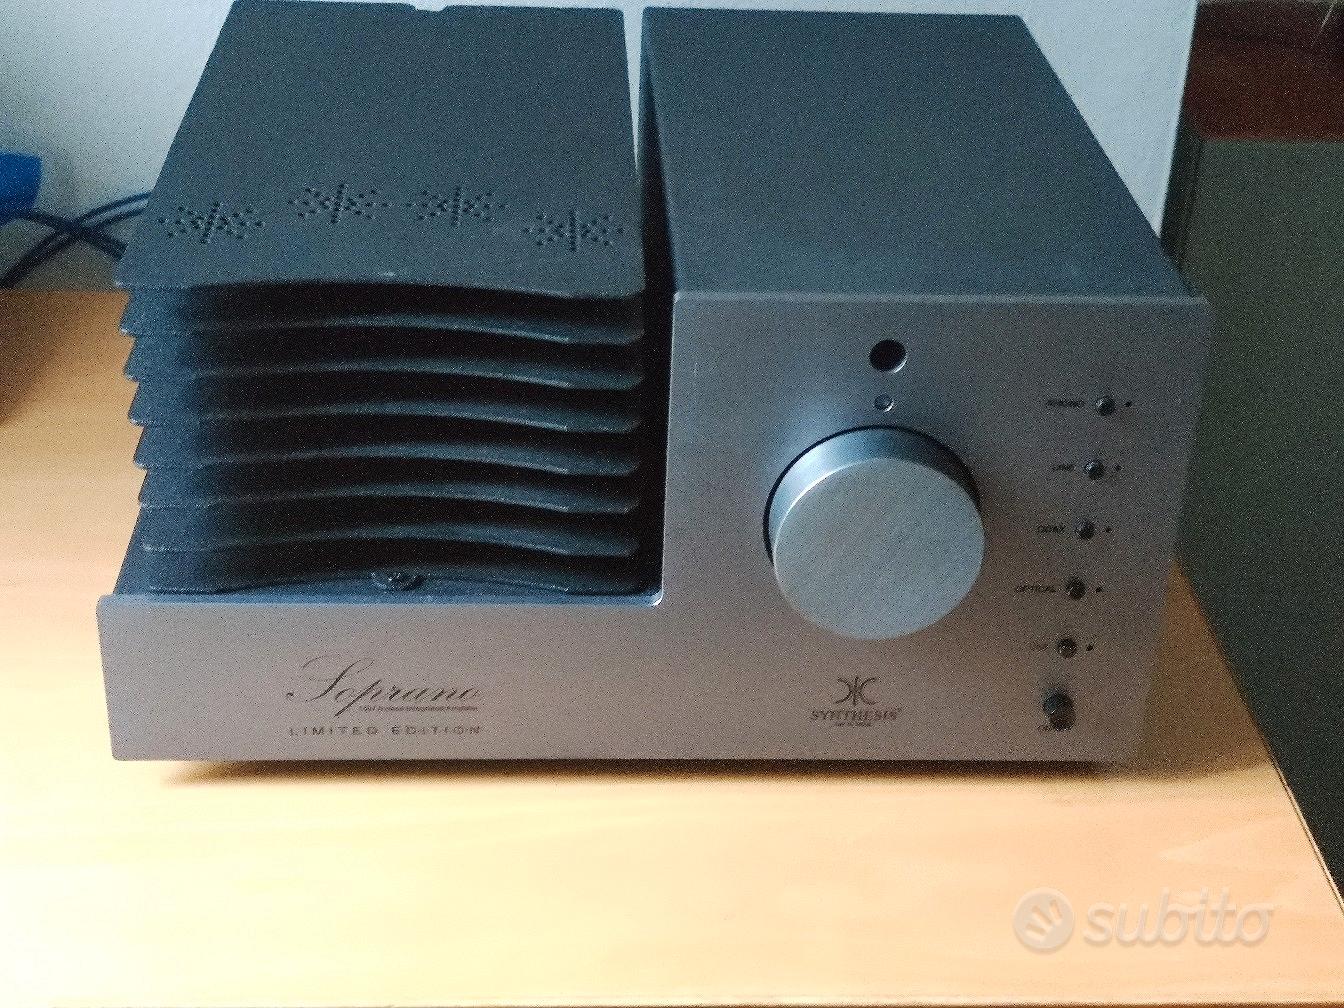 SYNTHESIS Soprano Limited Edition - Audio/Video In vendita a Vicenza